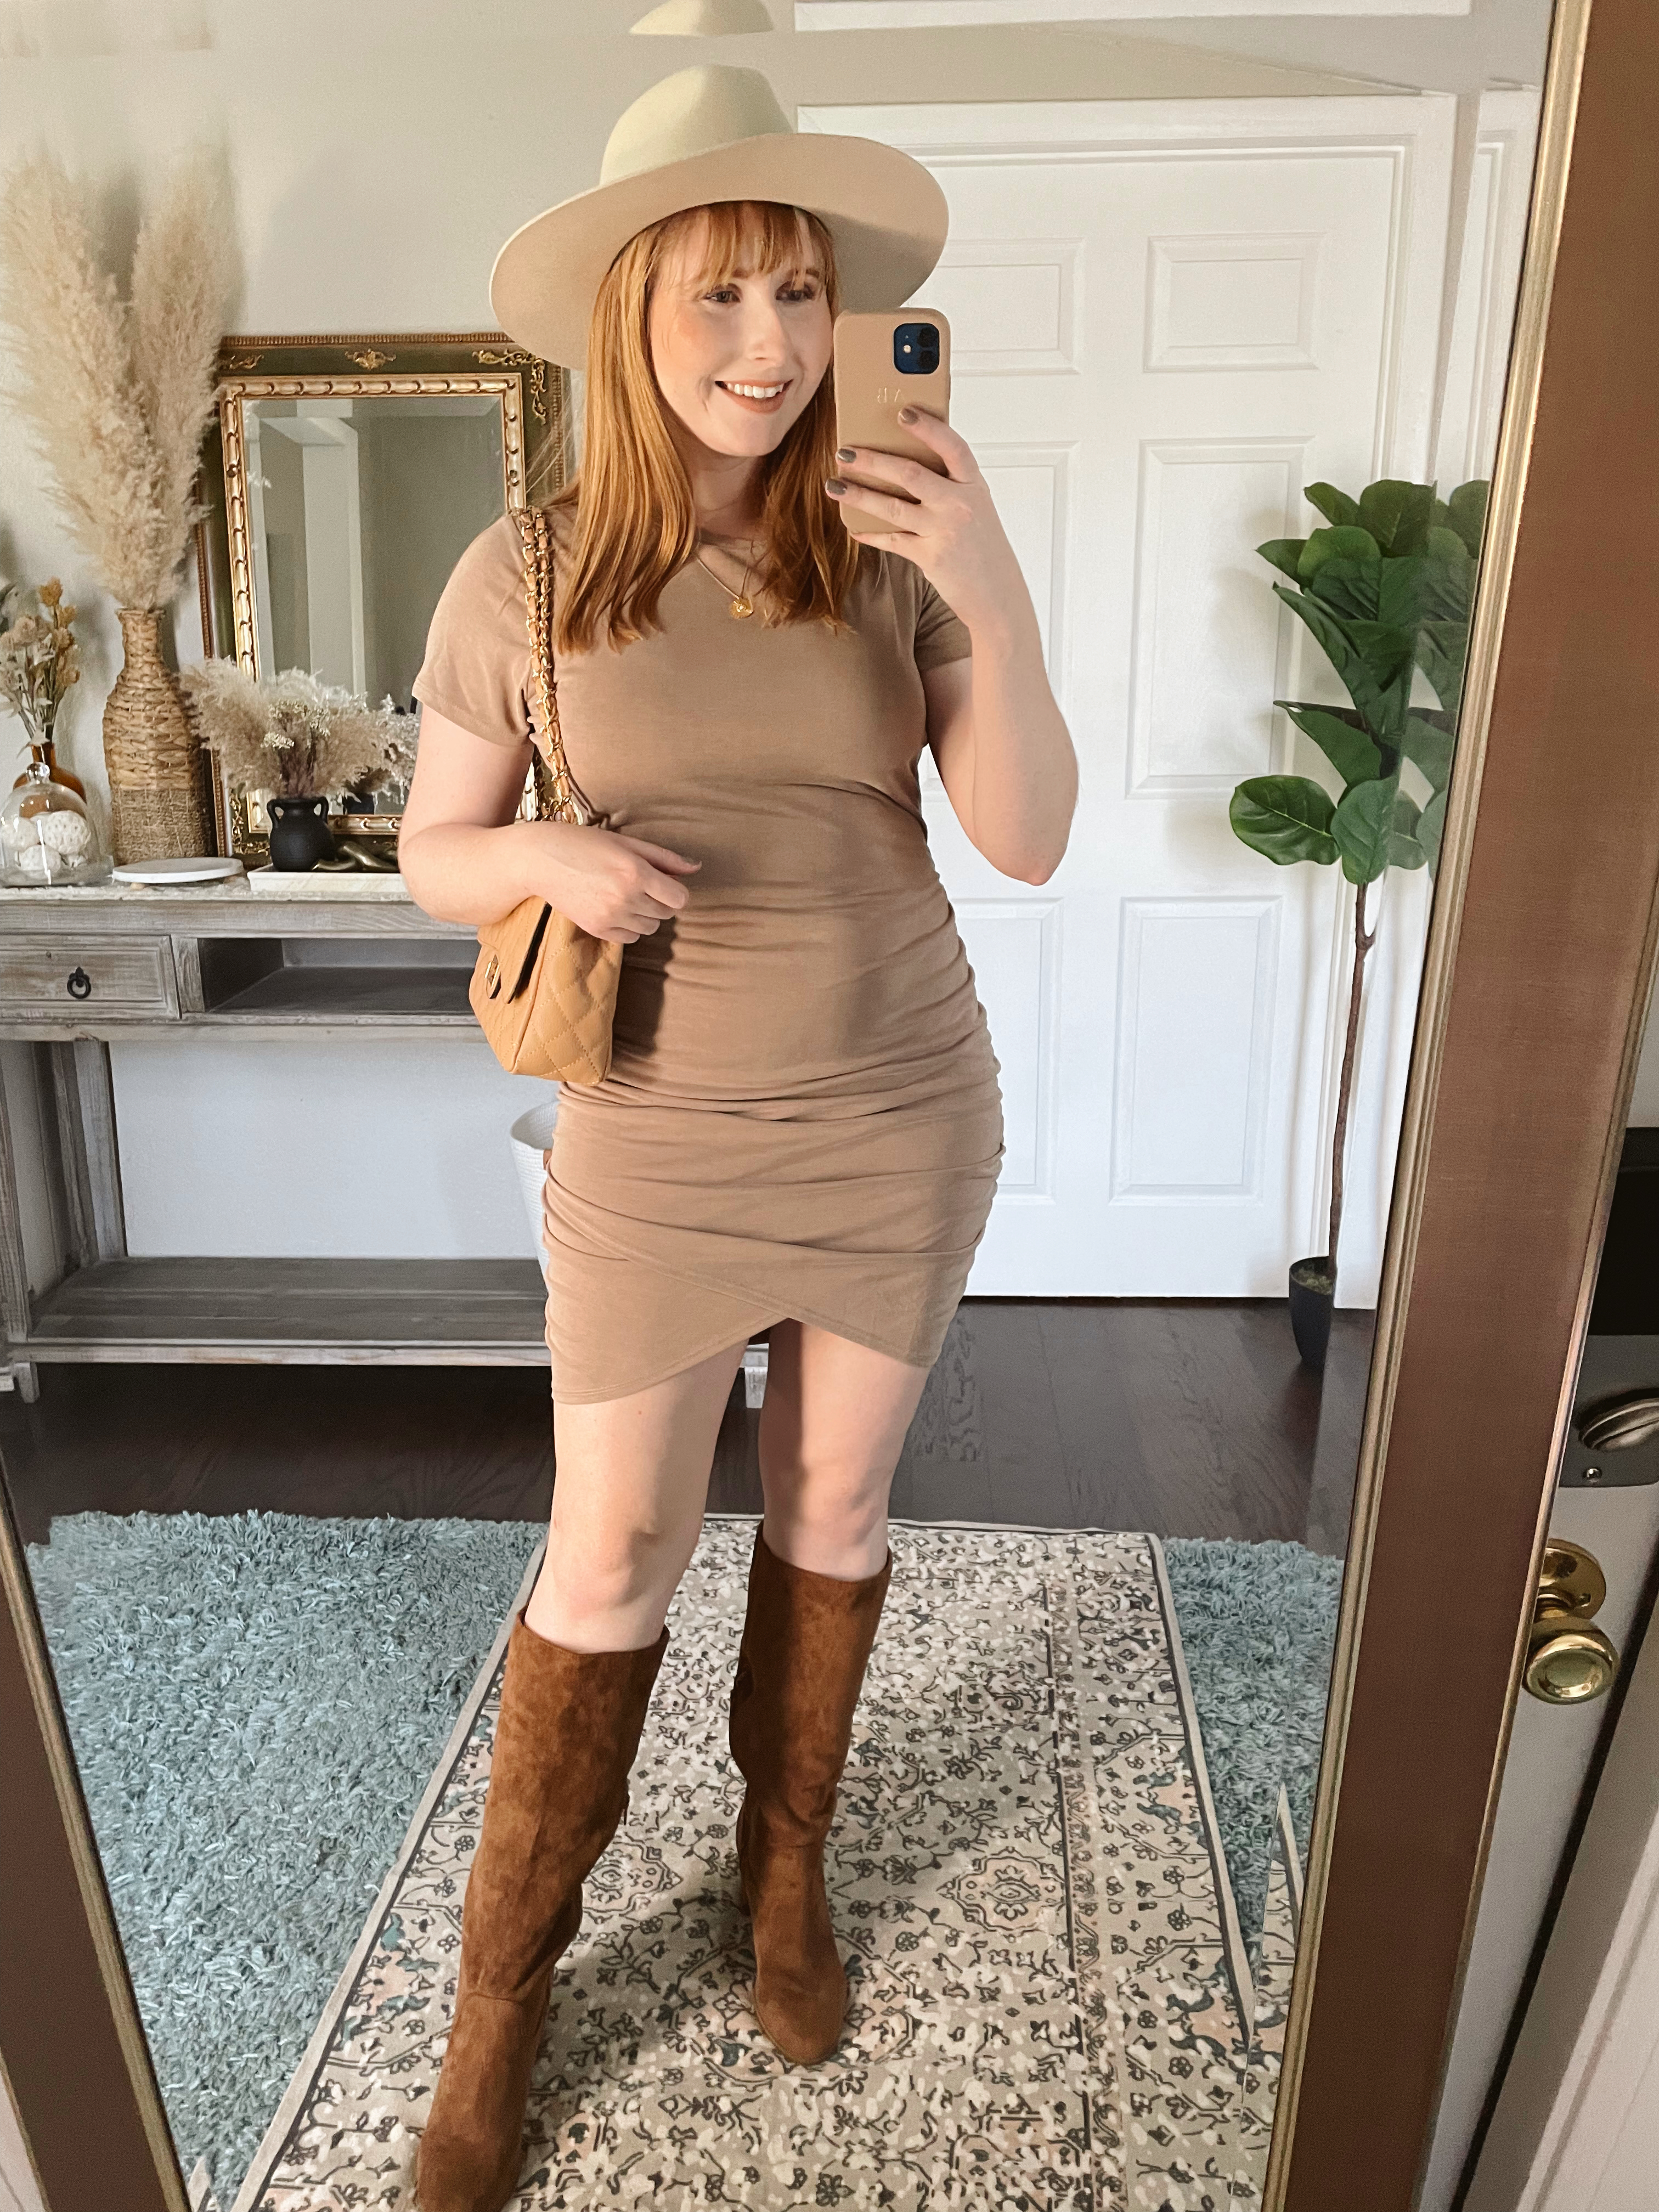 Express Fall Try On Haul. Express Dresses for Fall. Express New Arrivals for Women. Affordable Fall Outfit Ideas 2021.